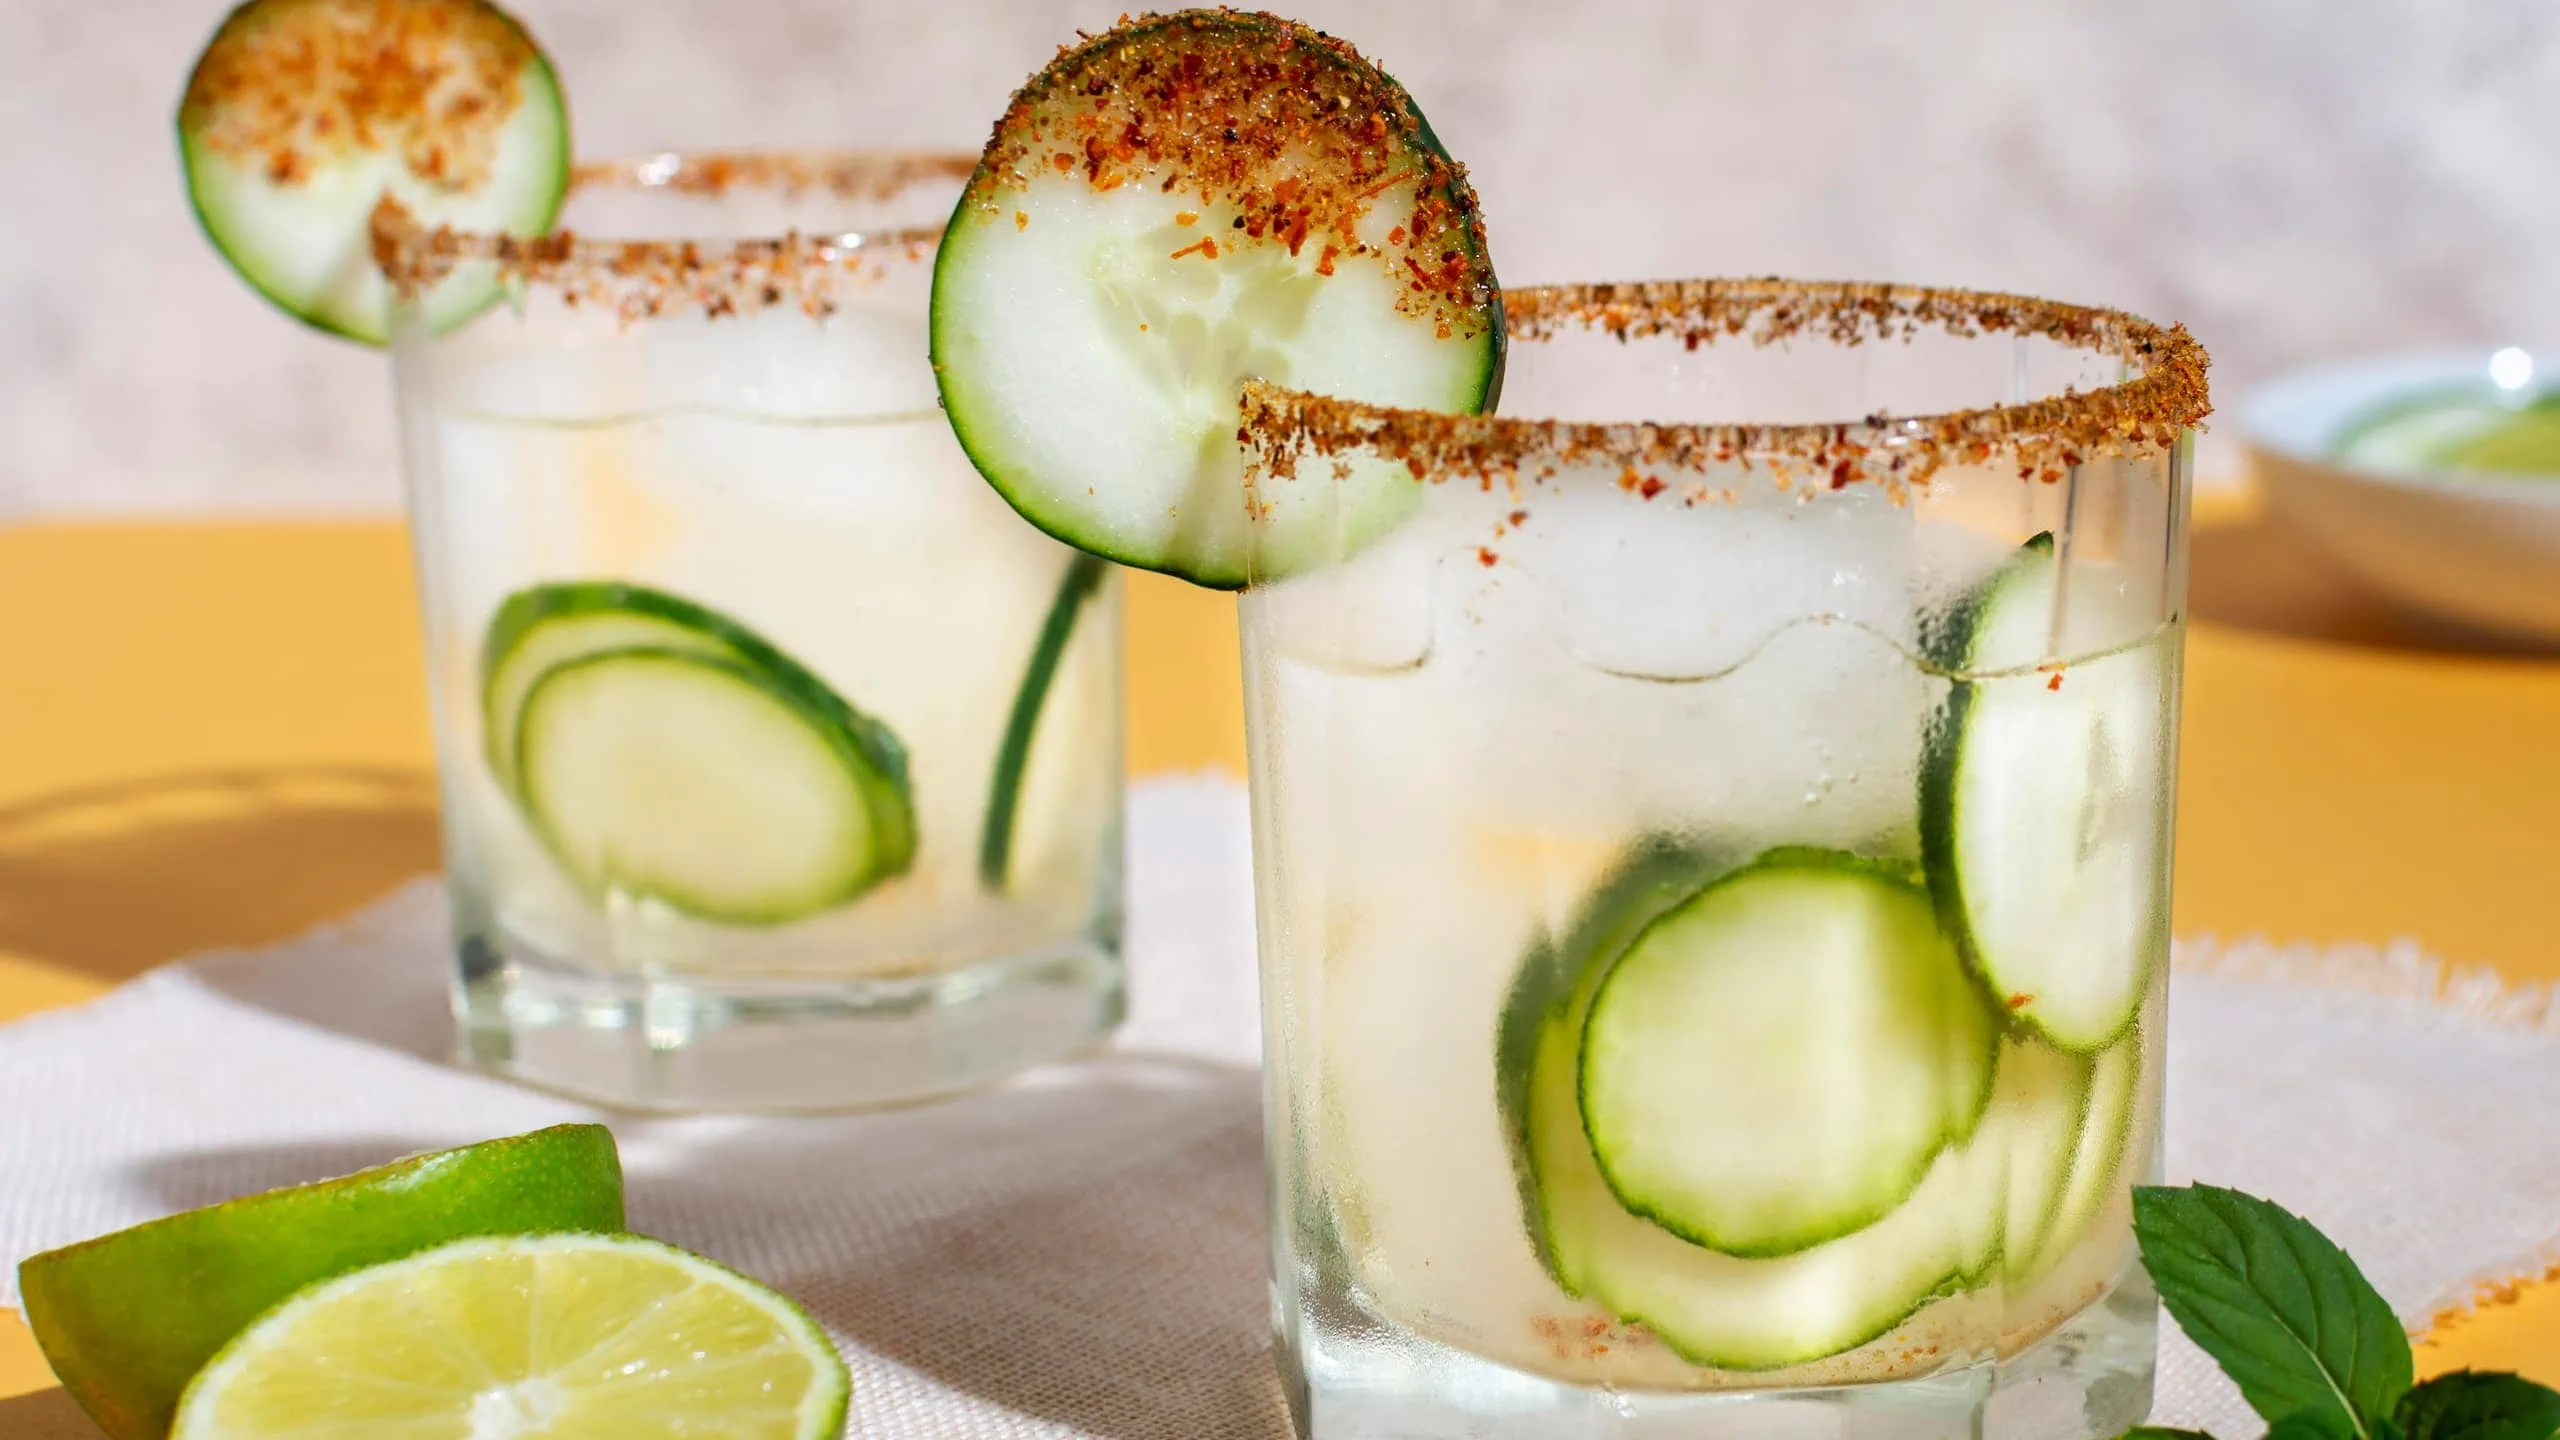 Our delicious pickle shot recipe garnished with chili and pickle